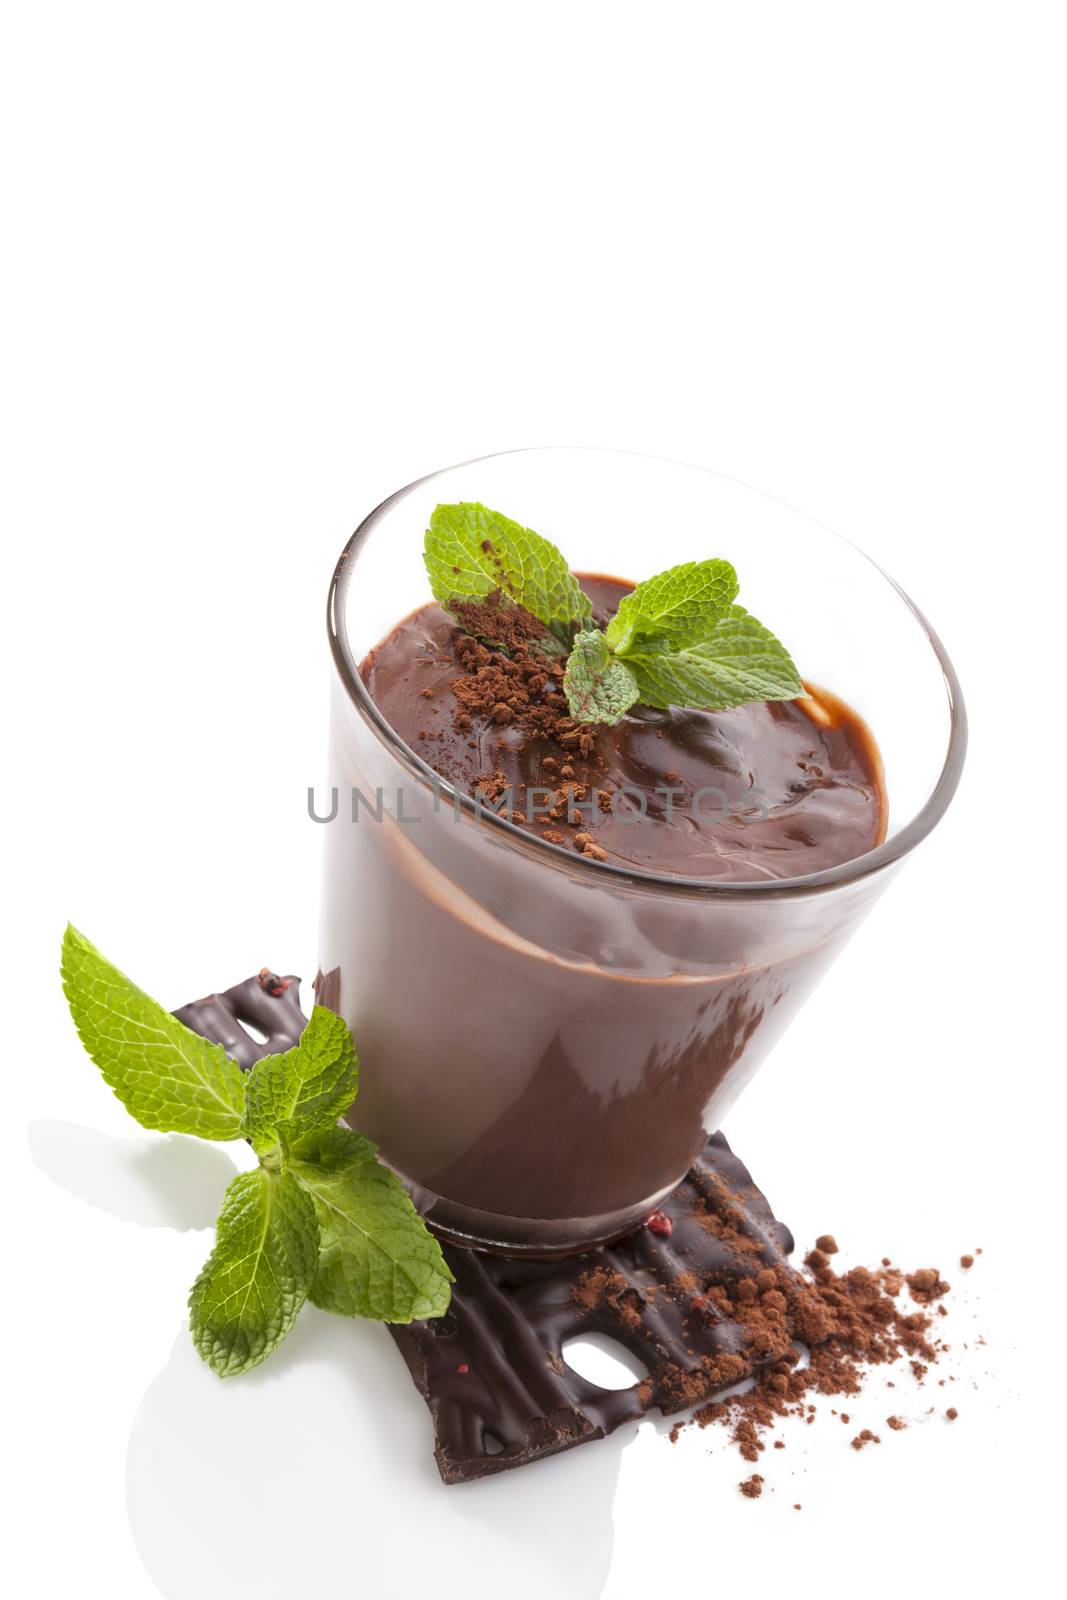 Chocolate pudding with fresh mint leaves and chocolate bar isolated on white background. Culinary sweet dessert.